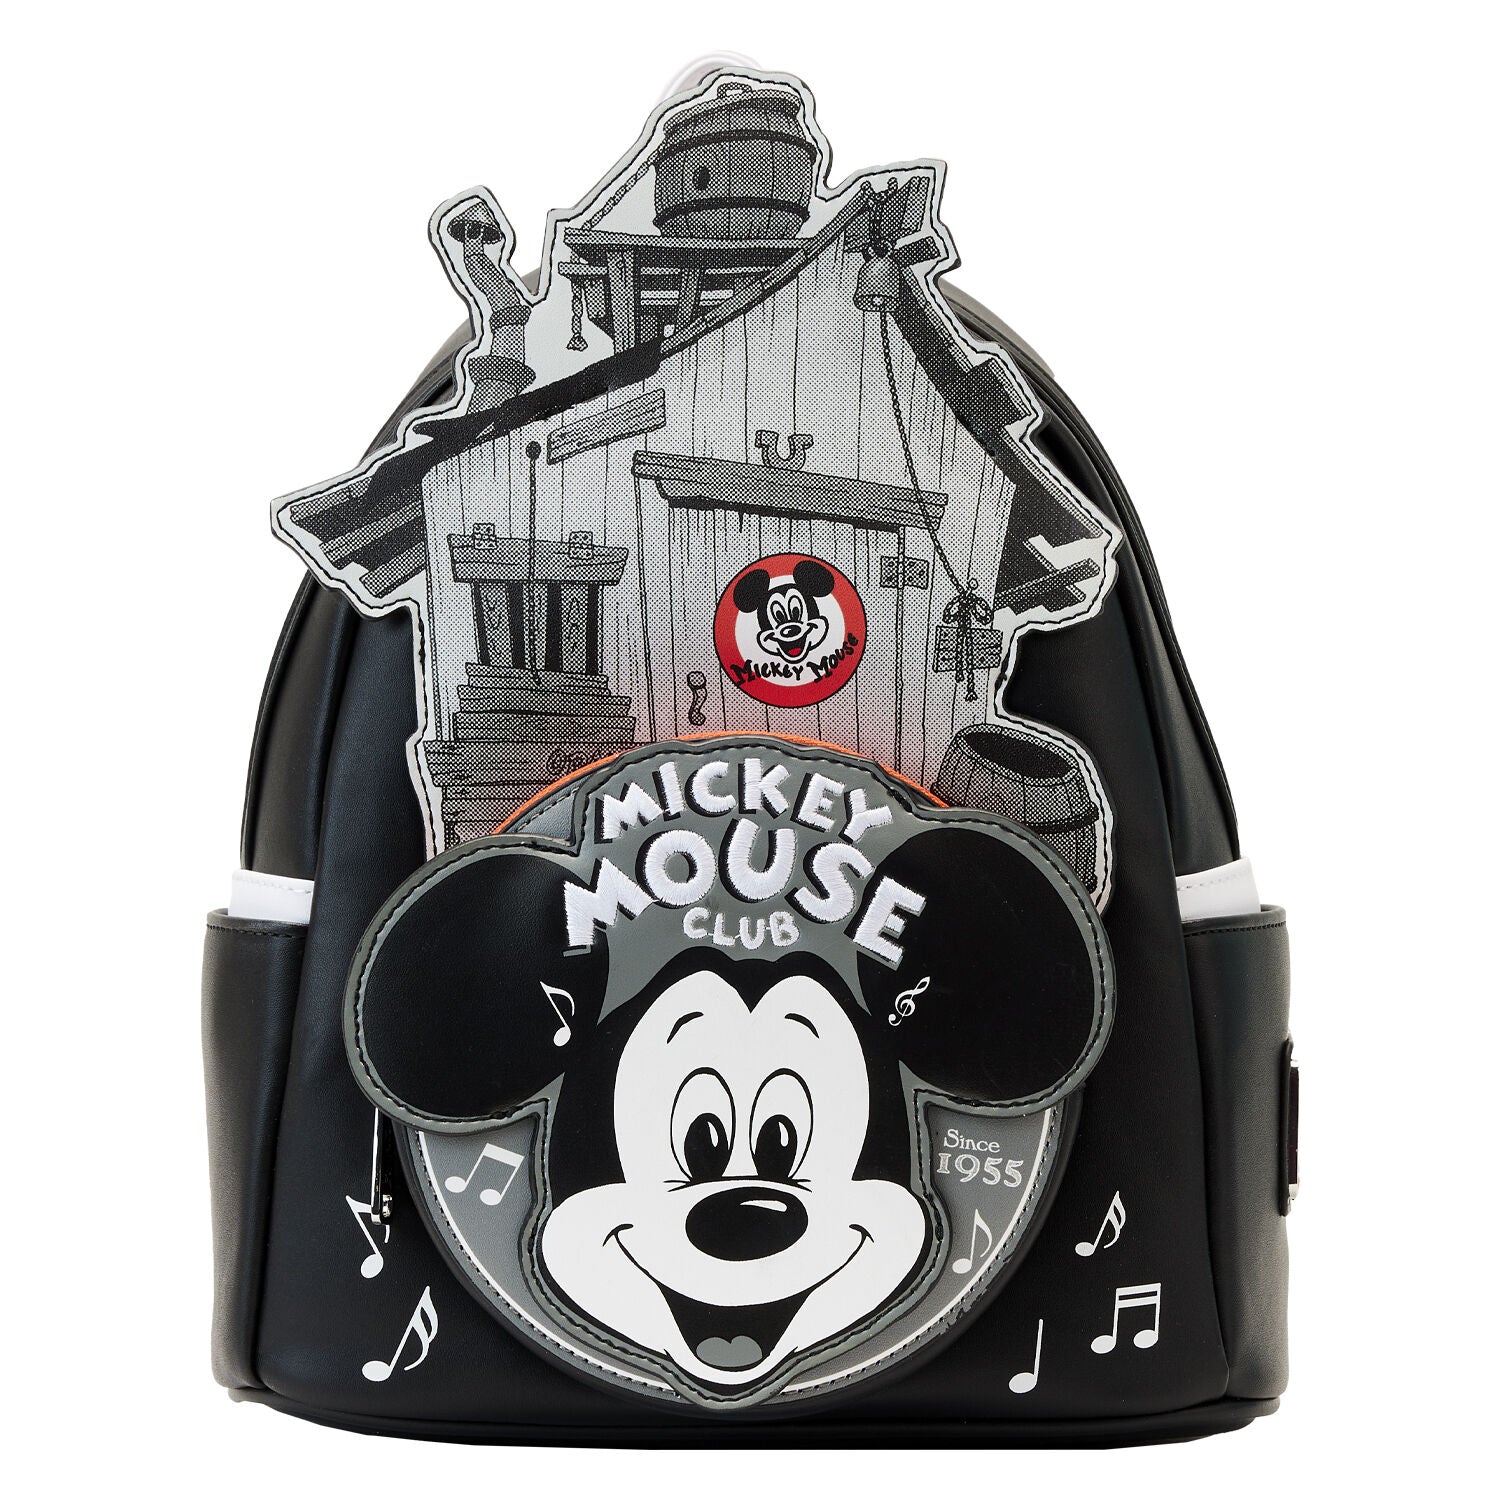 Officially licensed Disney Mickey Mouse Minnie Mouse Backpack